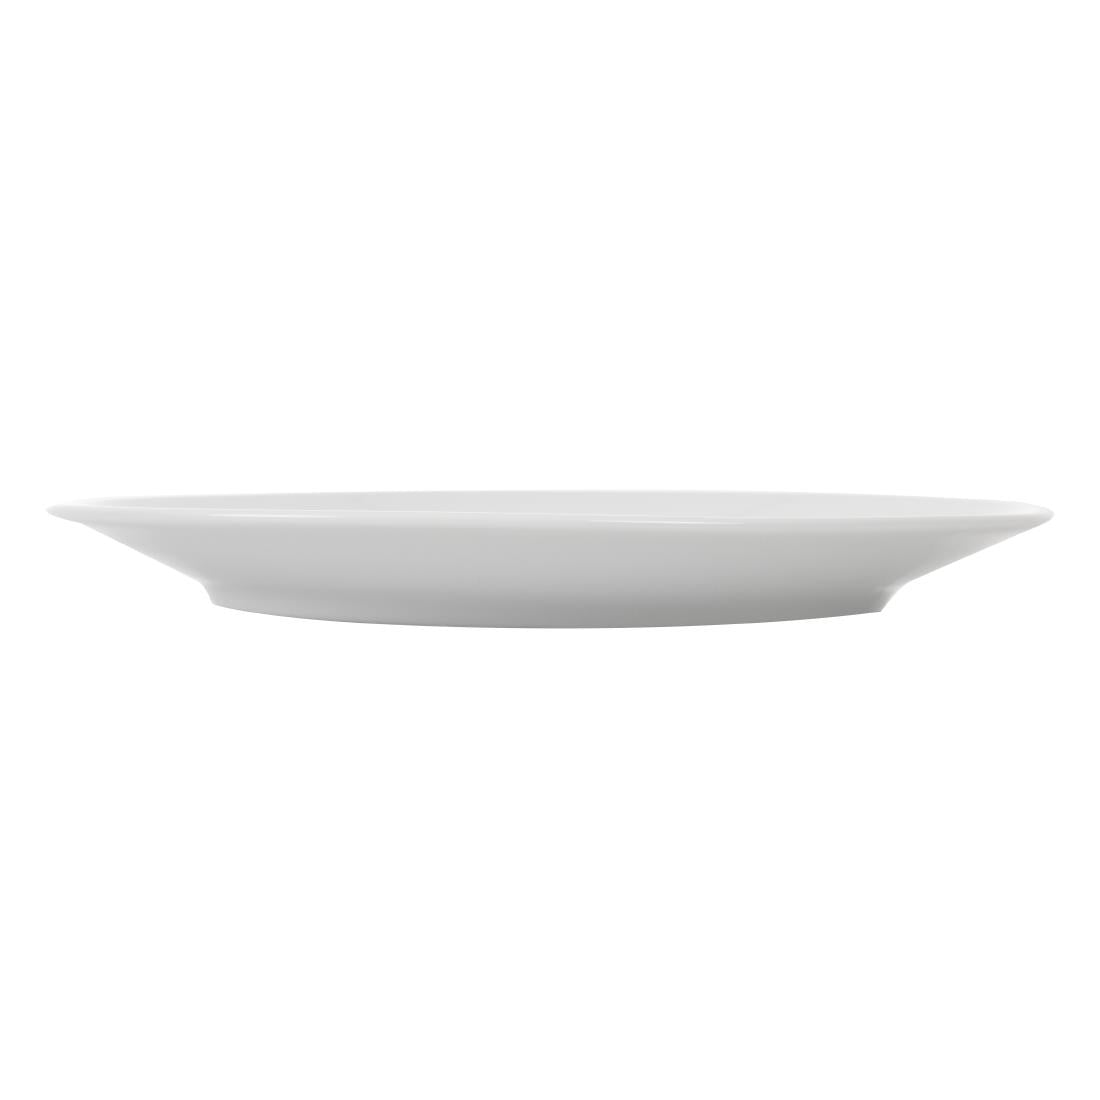 CG003 Royal Porcelain Classic White Coupe Plates 210mm (Pack of 12)